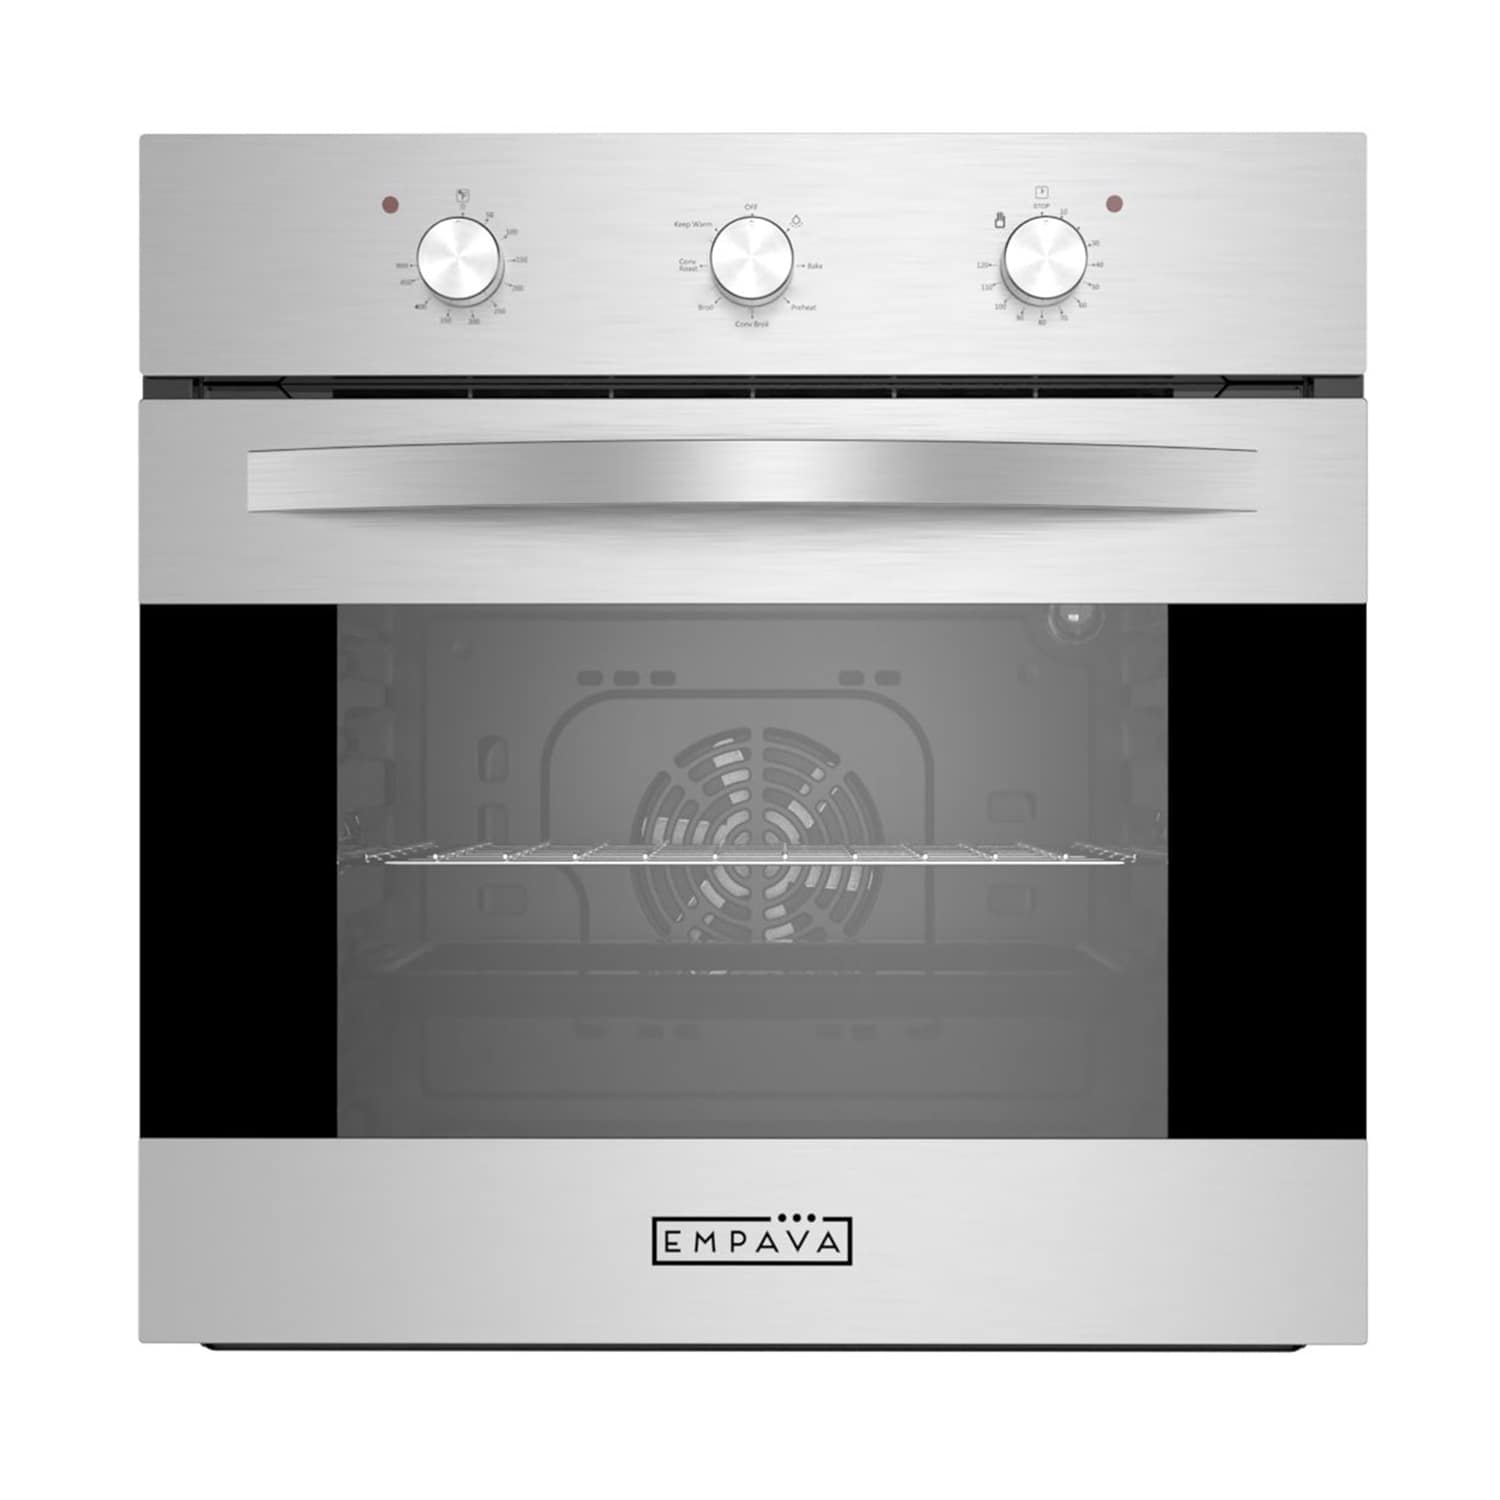 24 inch Single Electric Wall Ovens at